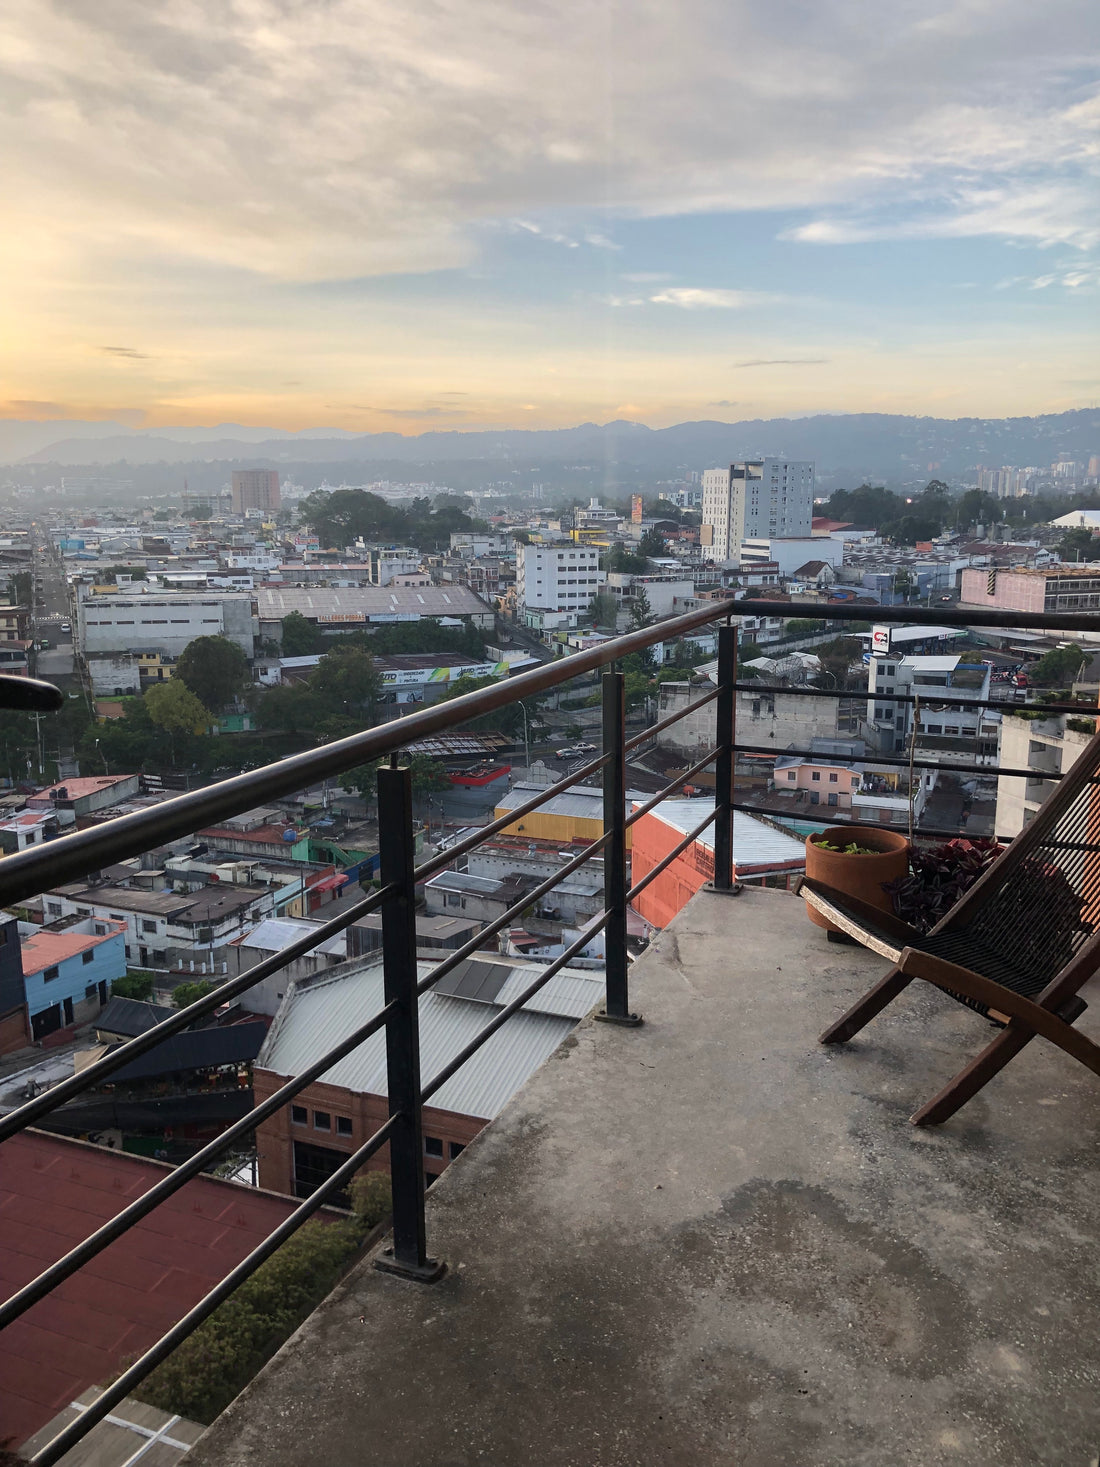 The view from my terrace overlooking Guatemala City